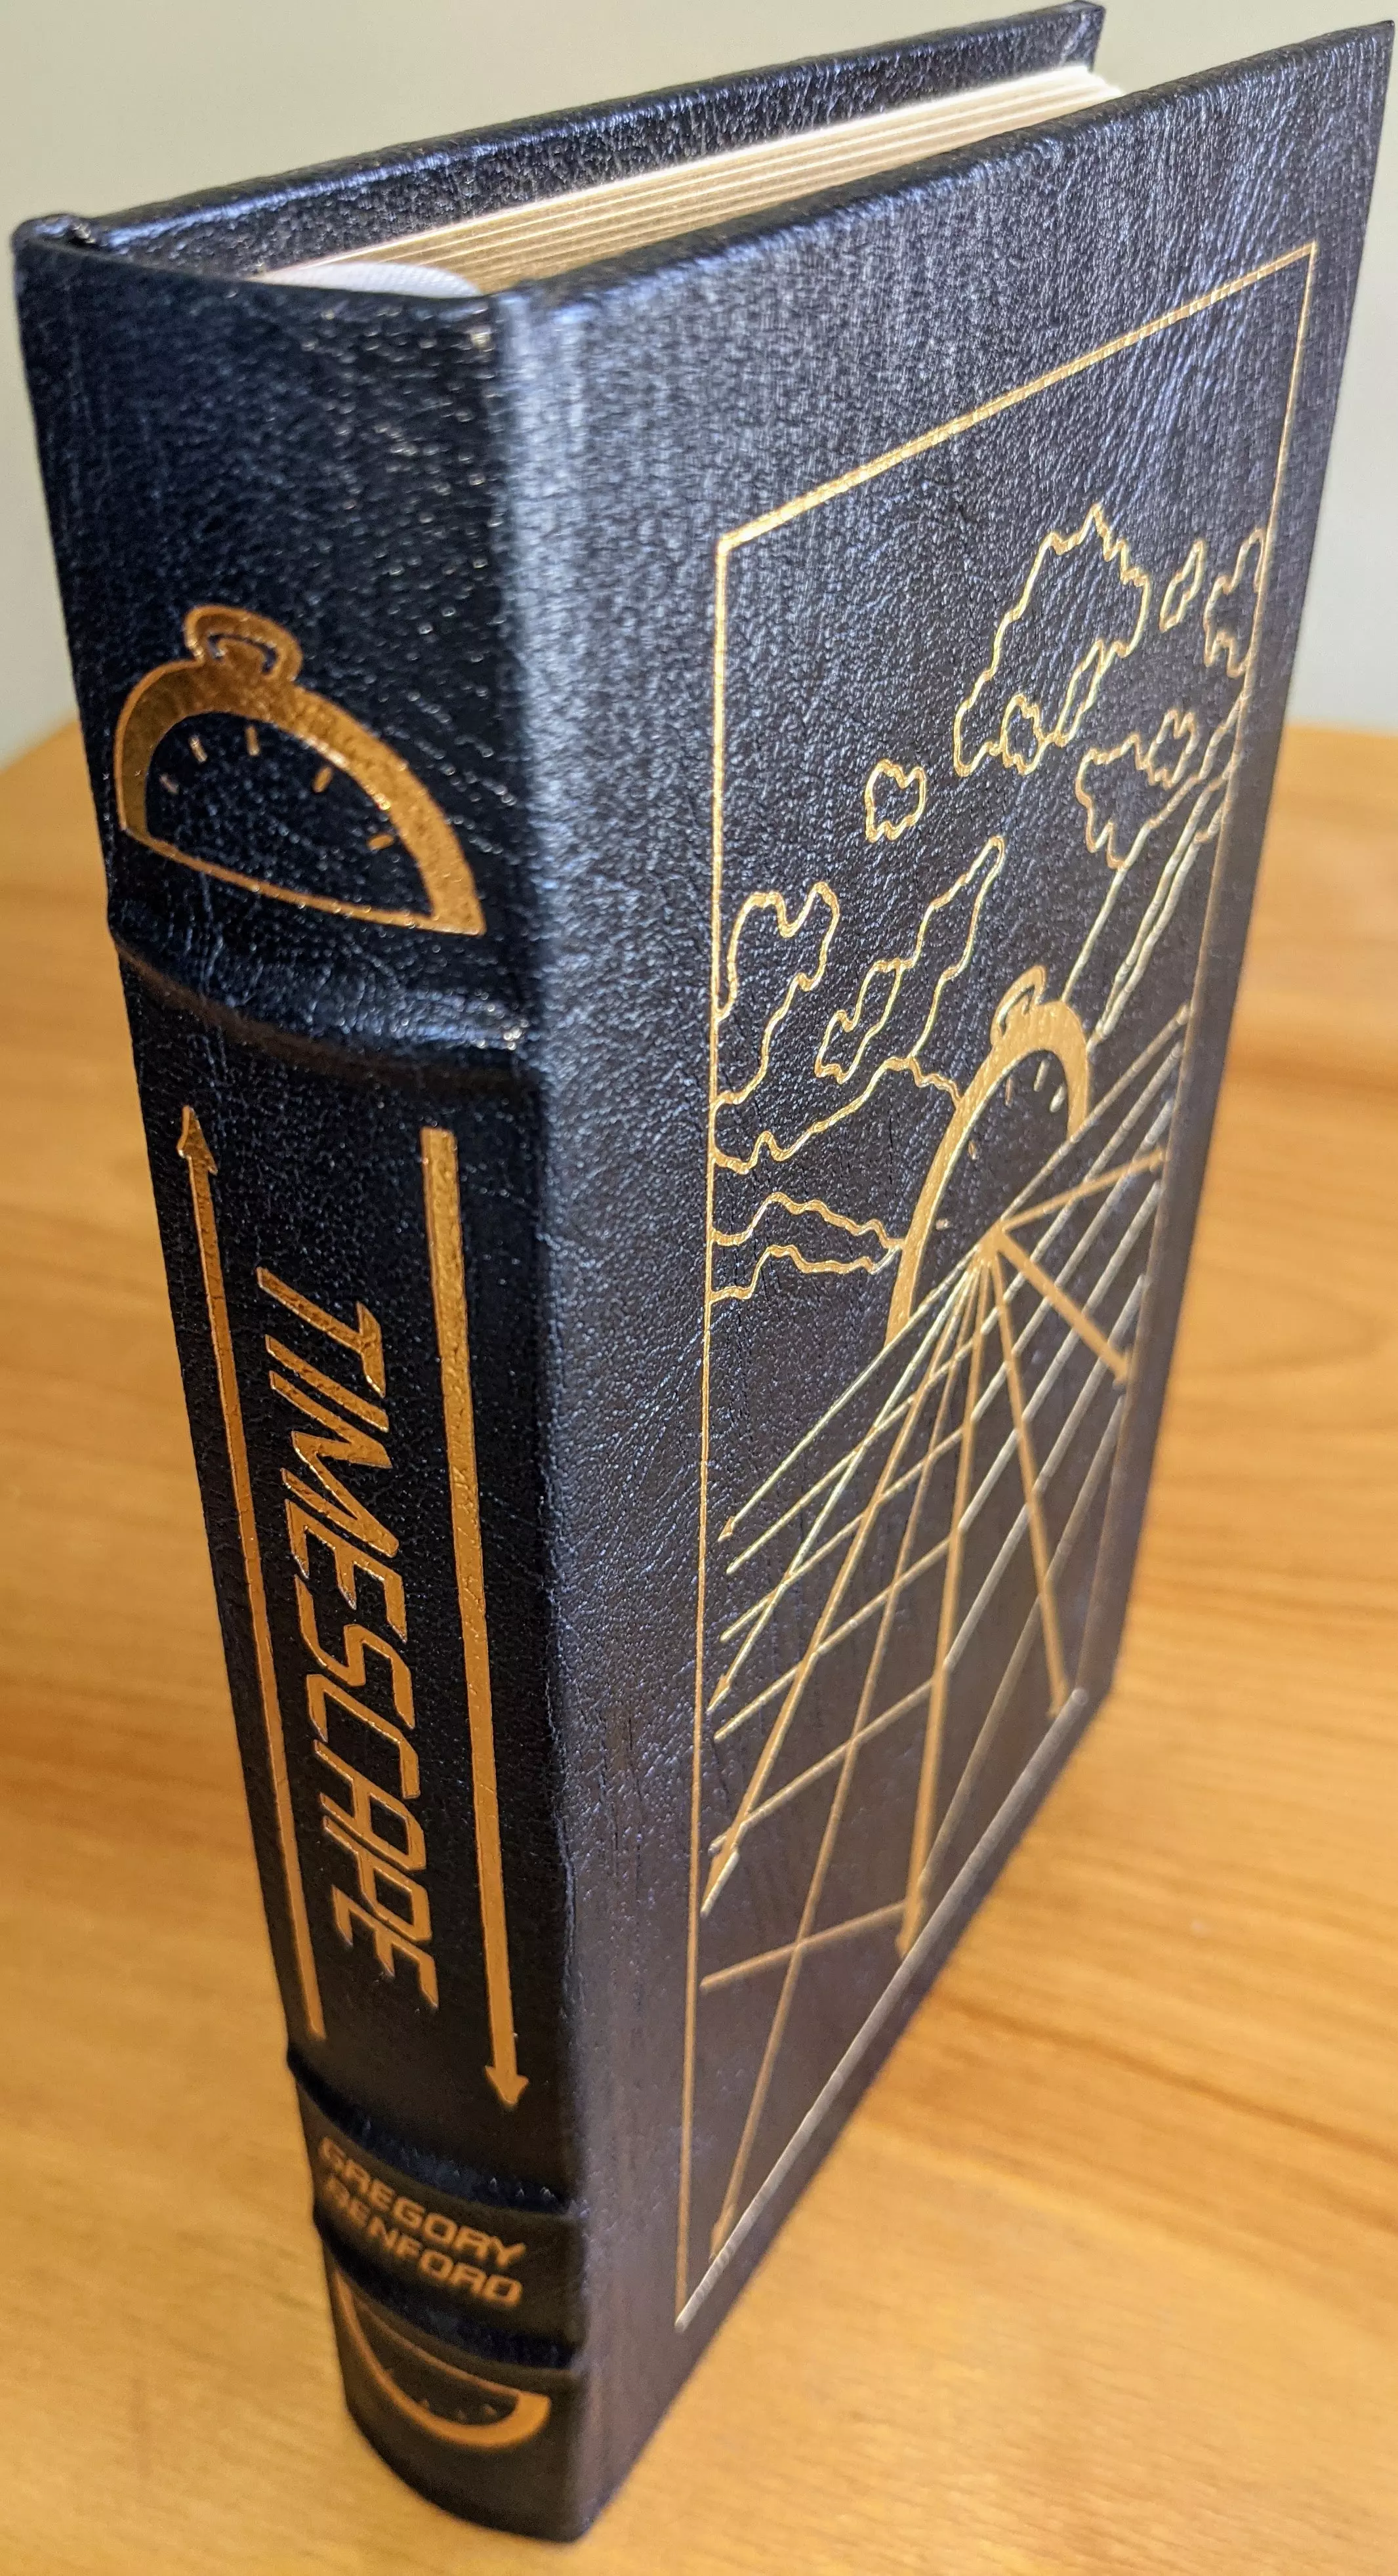 Stunning Navy Blue Leather Bound hardback book with hubbed spine, cover artwork in 22kt gold, printed on archival paper with gold gilded edges, smyth sewing & concealed muslin joints
	  - original artwork by Bob Eggleton